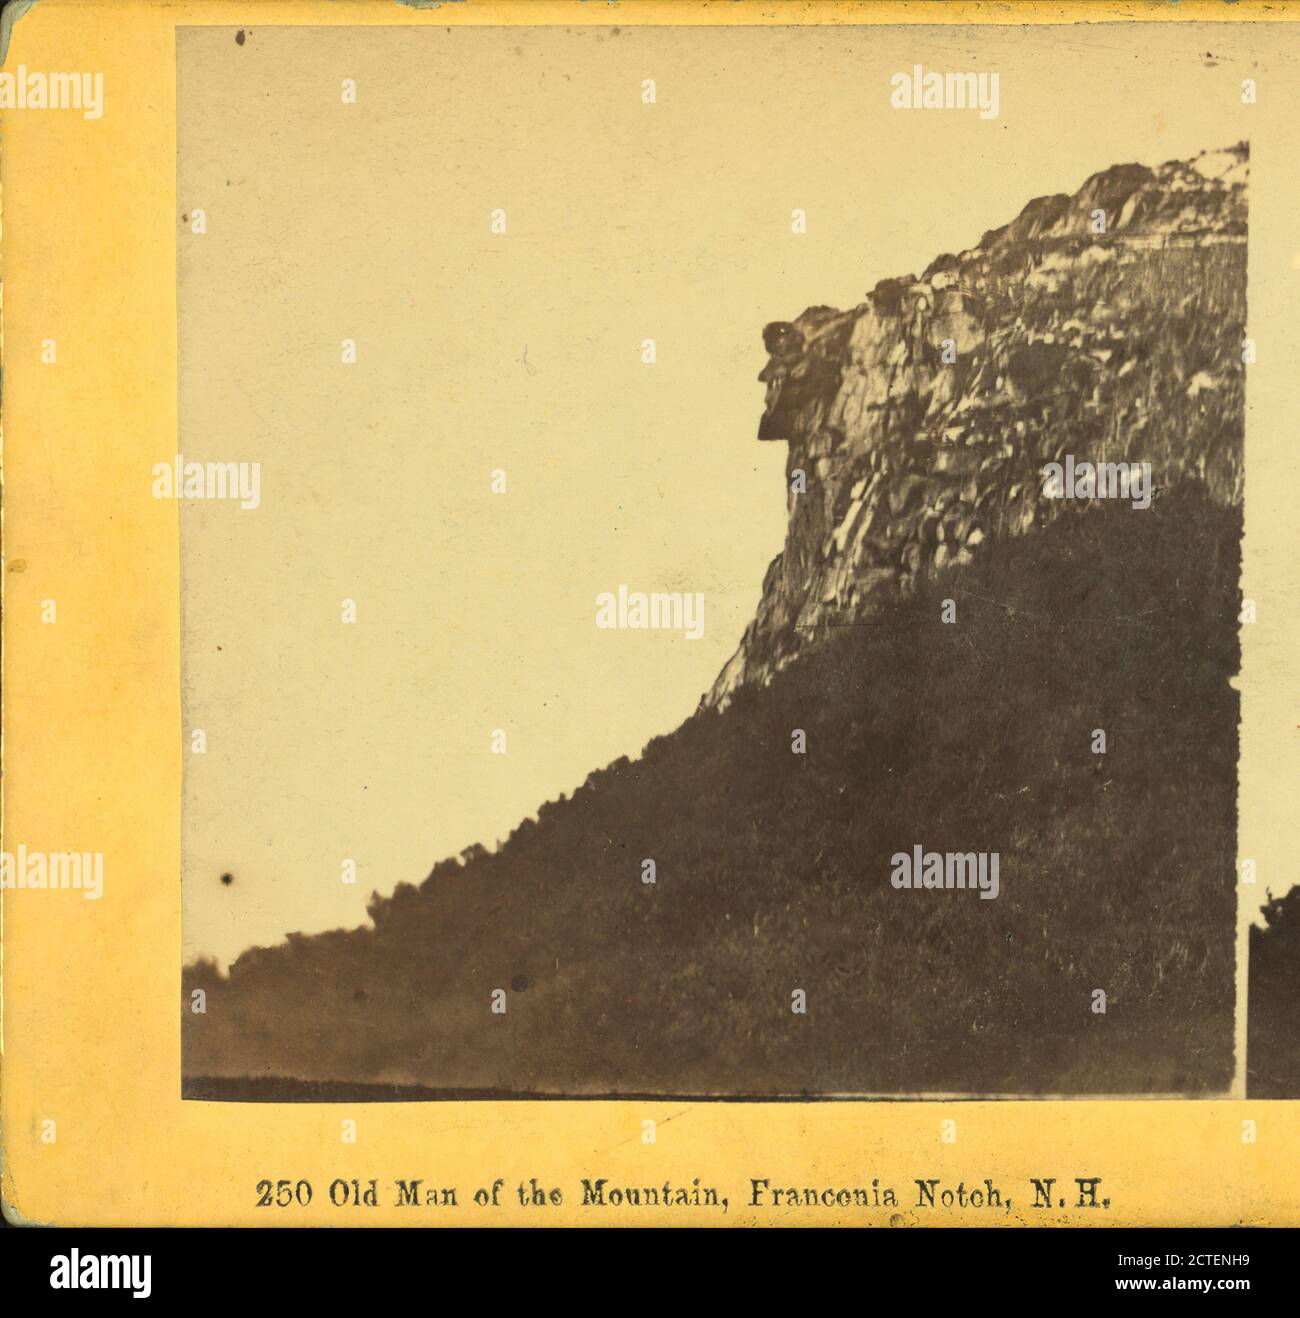 Old man of the Mountain, Franconia Notch, N.H., Bierstadt Brothers, Canyons, Rocks, Mountains, Faces, Profiles (Figuren), New Hampshire, White Mountains (N.H. und ich Stockfoto